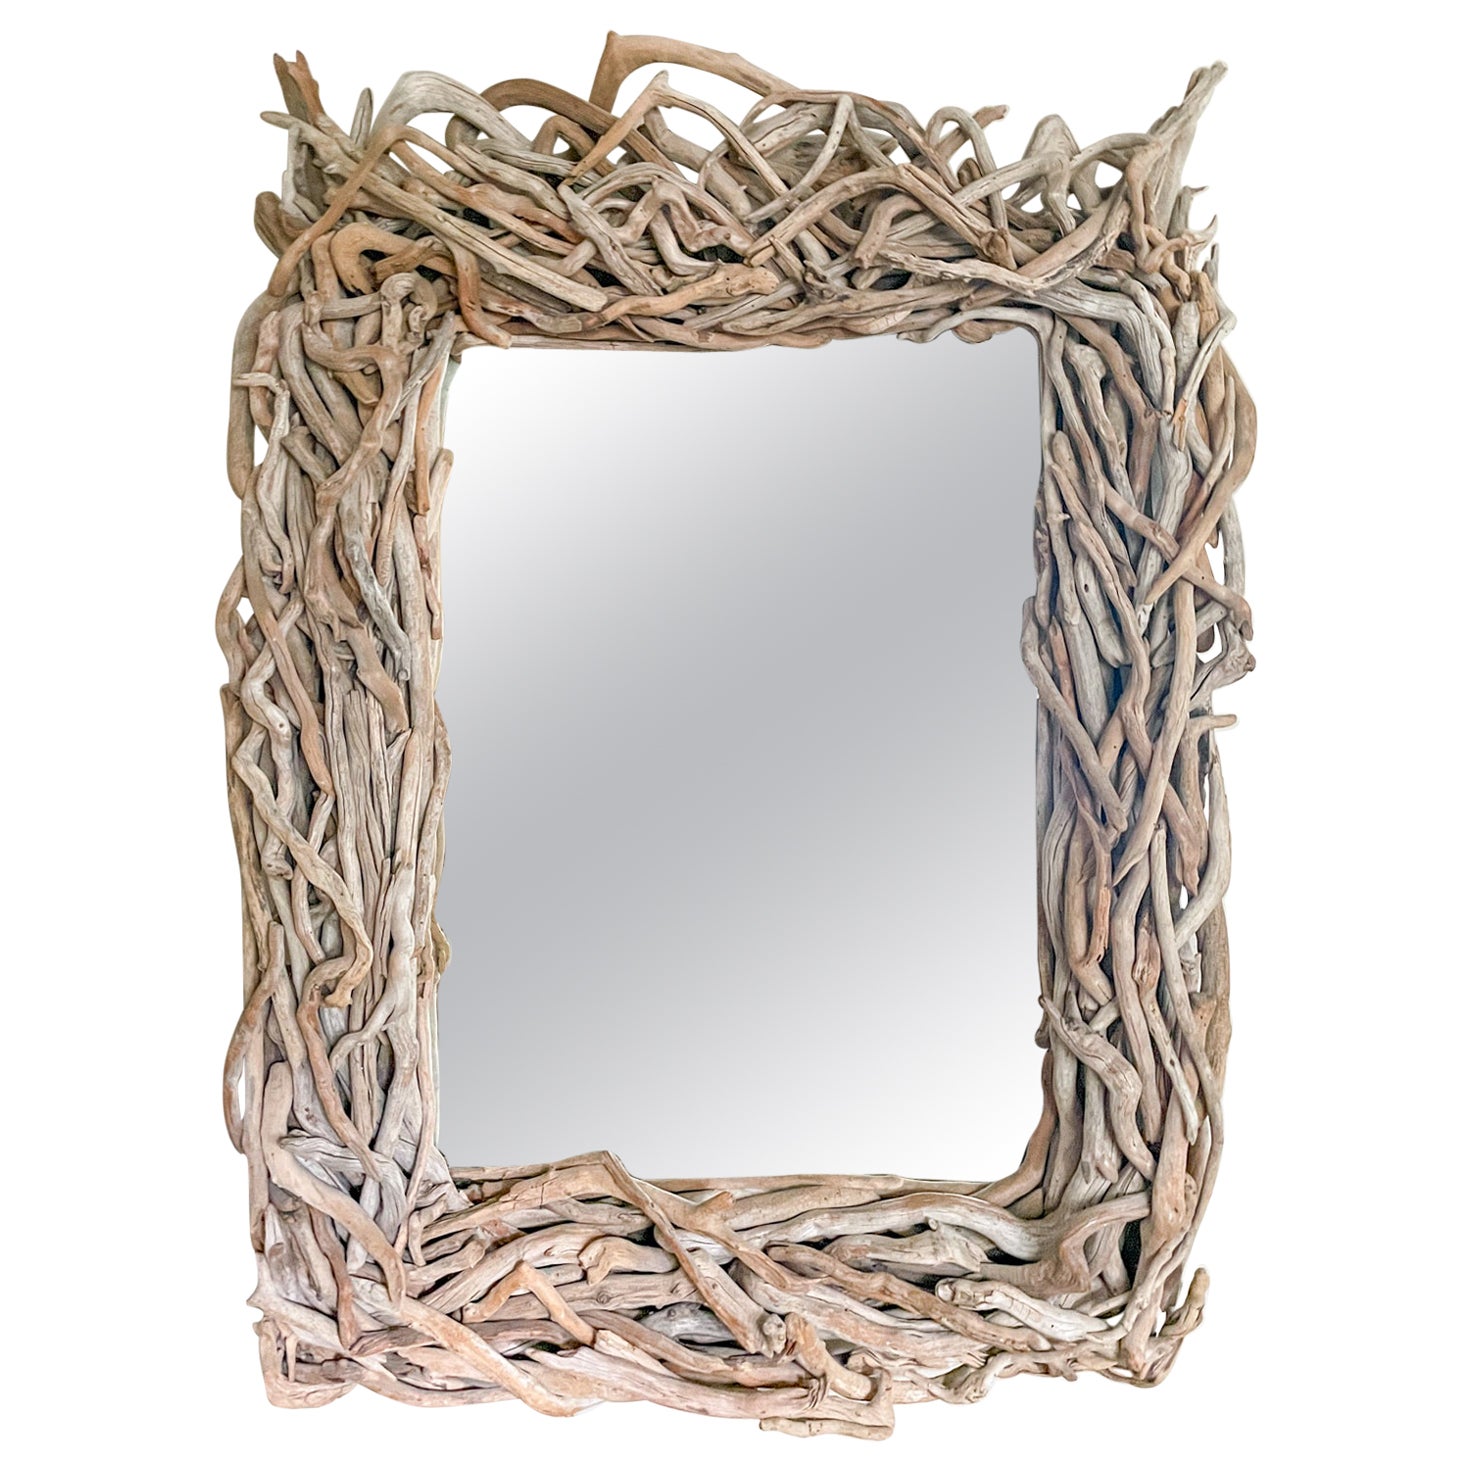 Driftwood Mirrors - 7 For Sale at 1stDibs | drift wood mirror, driftwood 